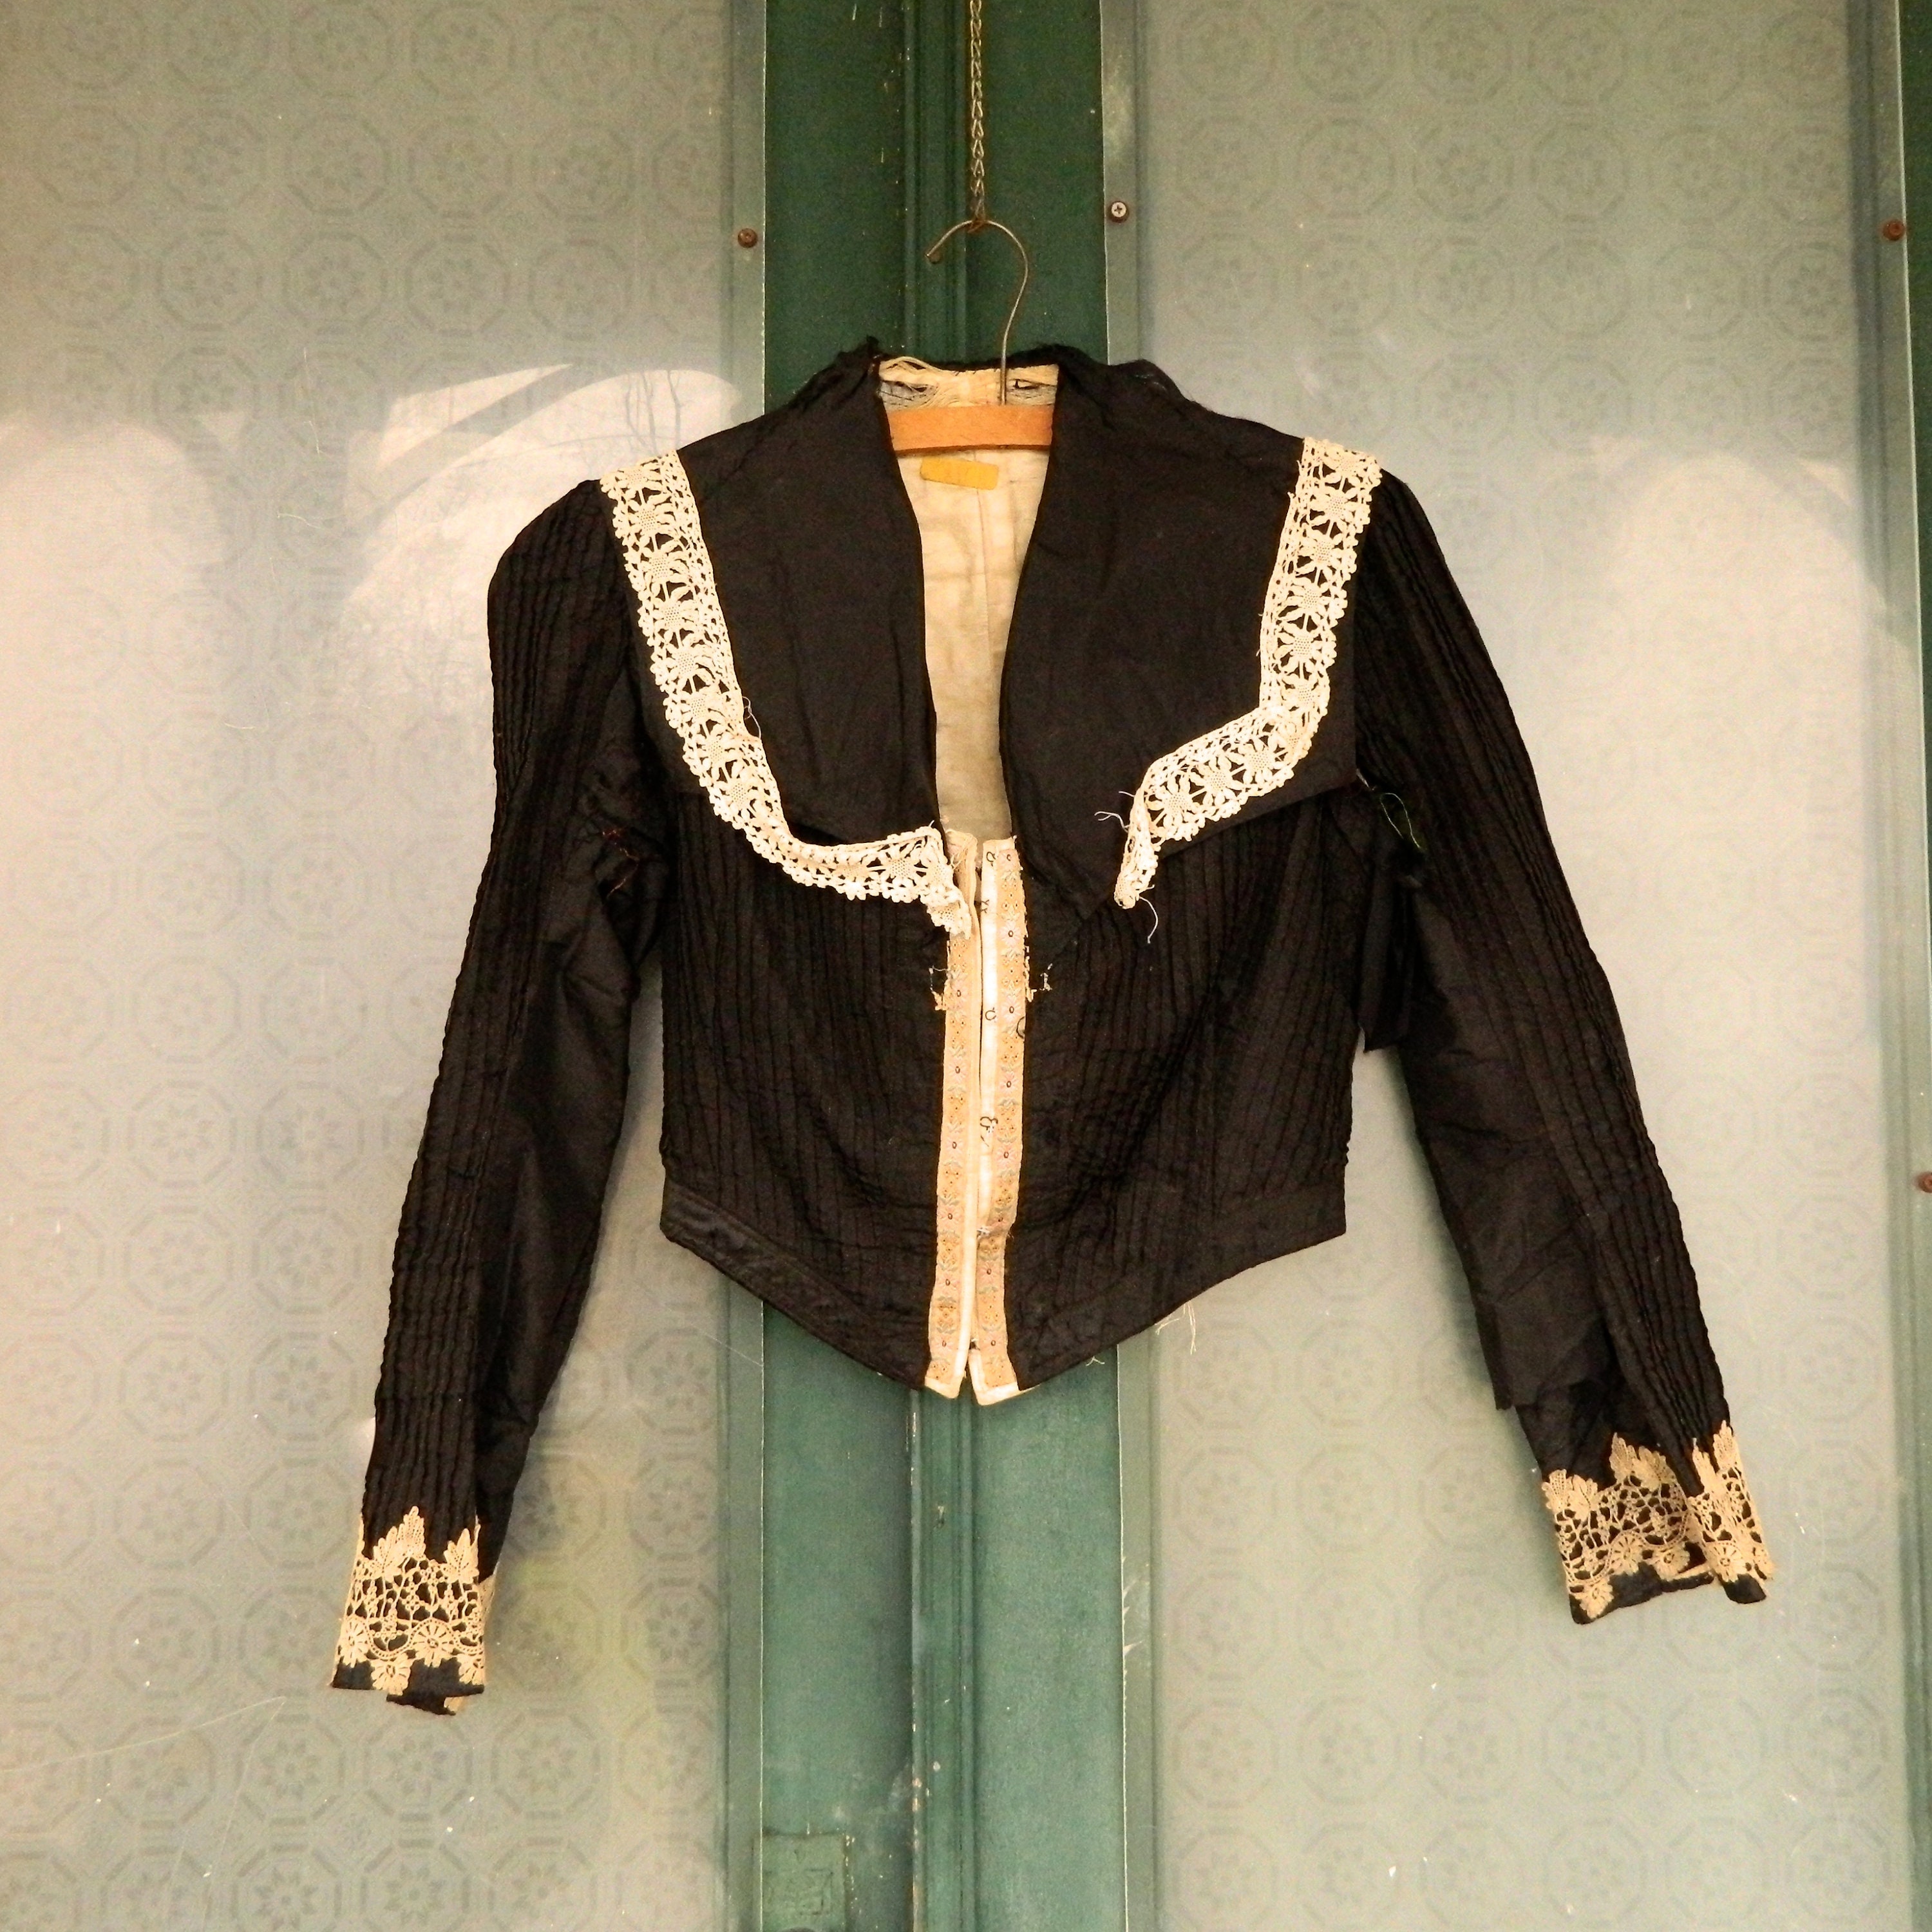 Edwardian Pintuck Blouse in Black with White Lace Trim